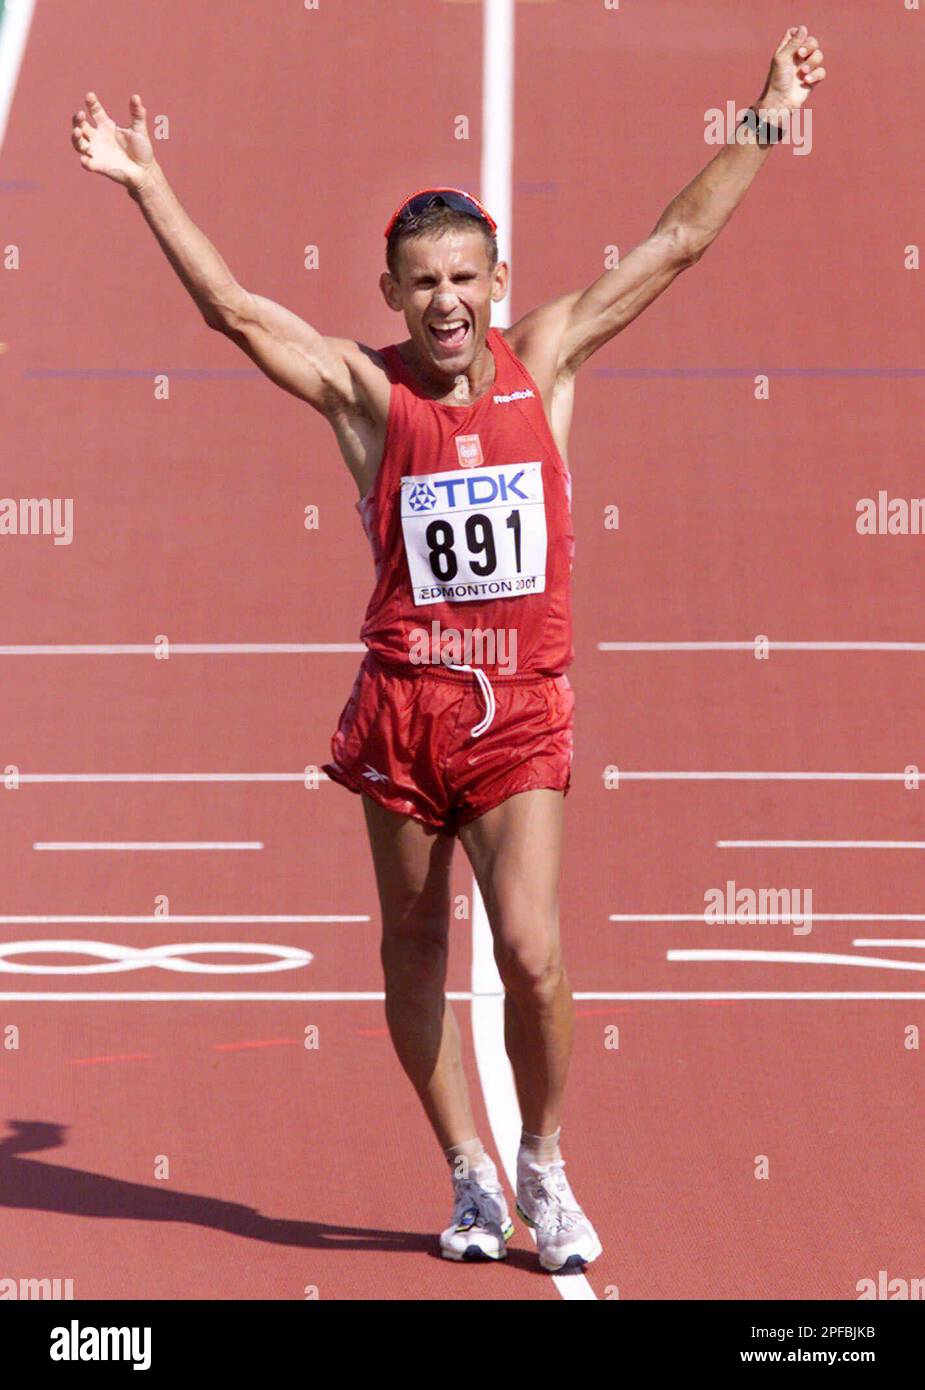 Poland's Robert Korzeniowski celebrates after crossing the finish line to win the men's 50 kilometers walk at the World Track and Field Championships in Edmonton, Alberta, Saturday August 11, 2001. (AP Photo/CP, Kevin Frayer) Stock Photo